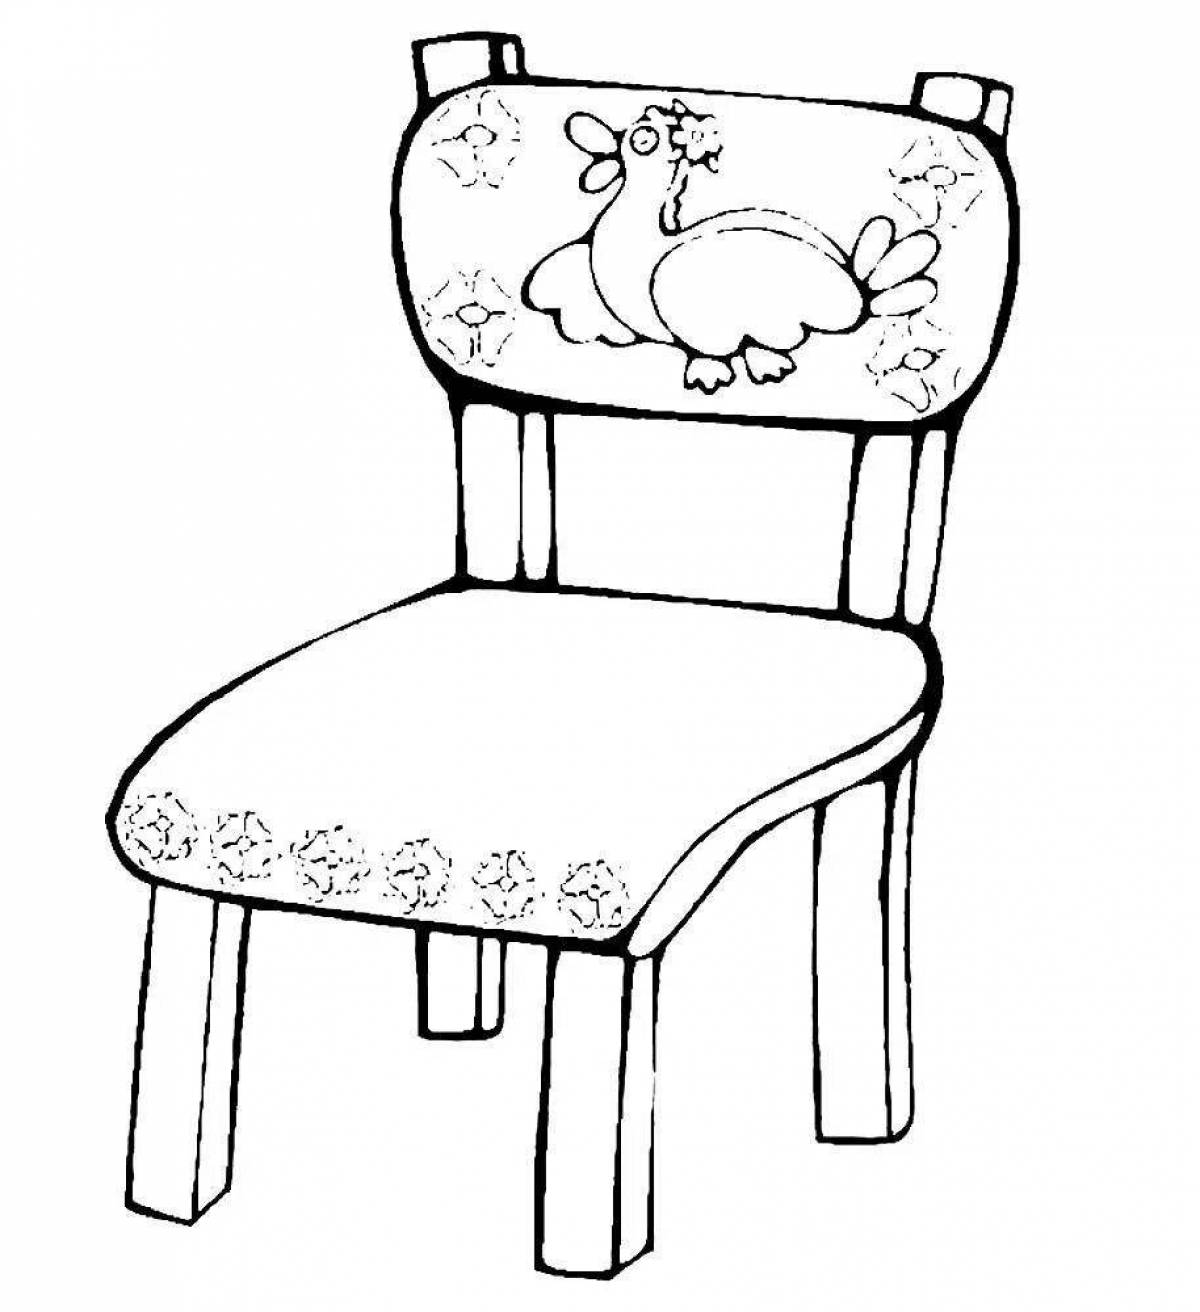 Coloring book living chair